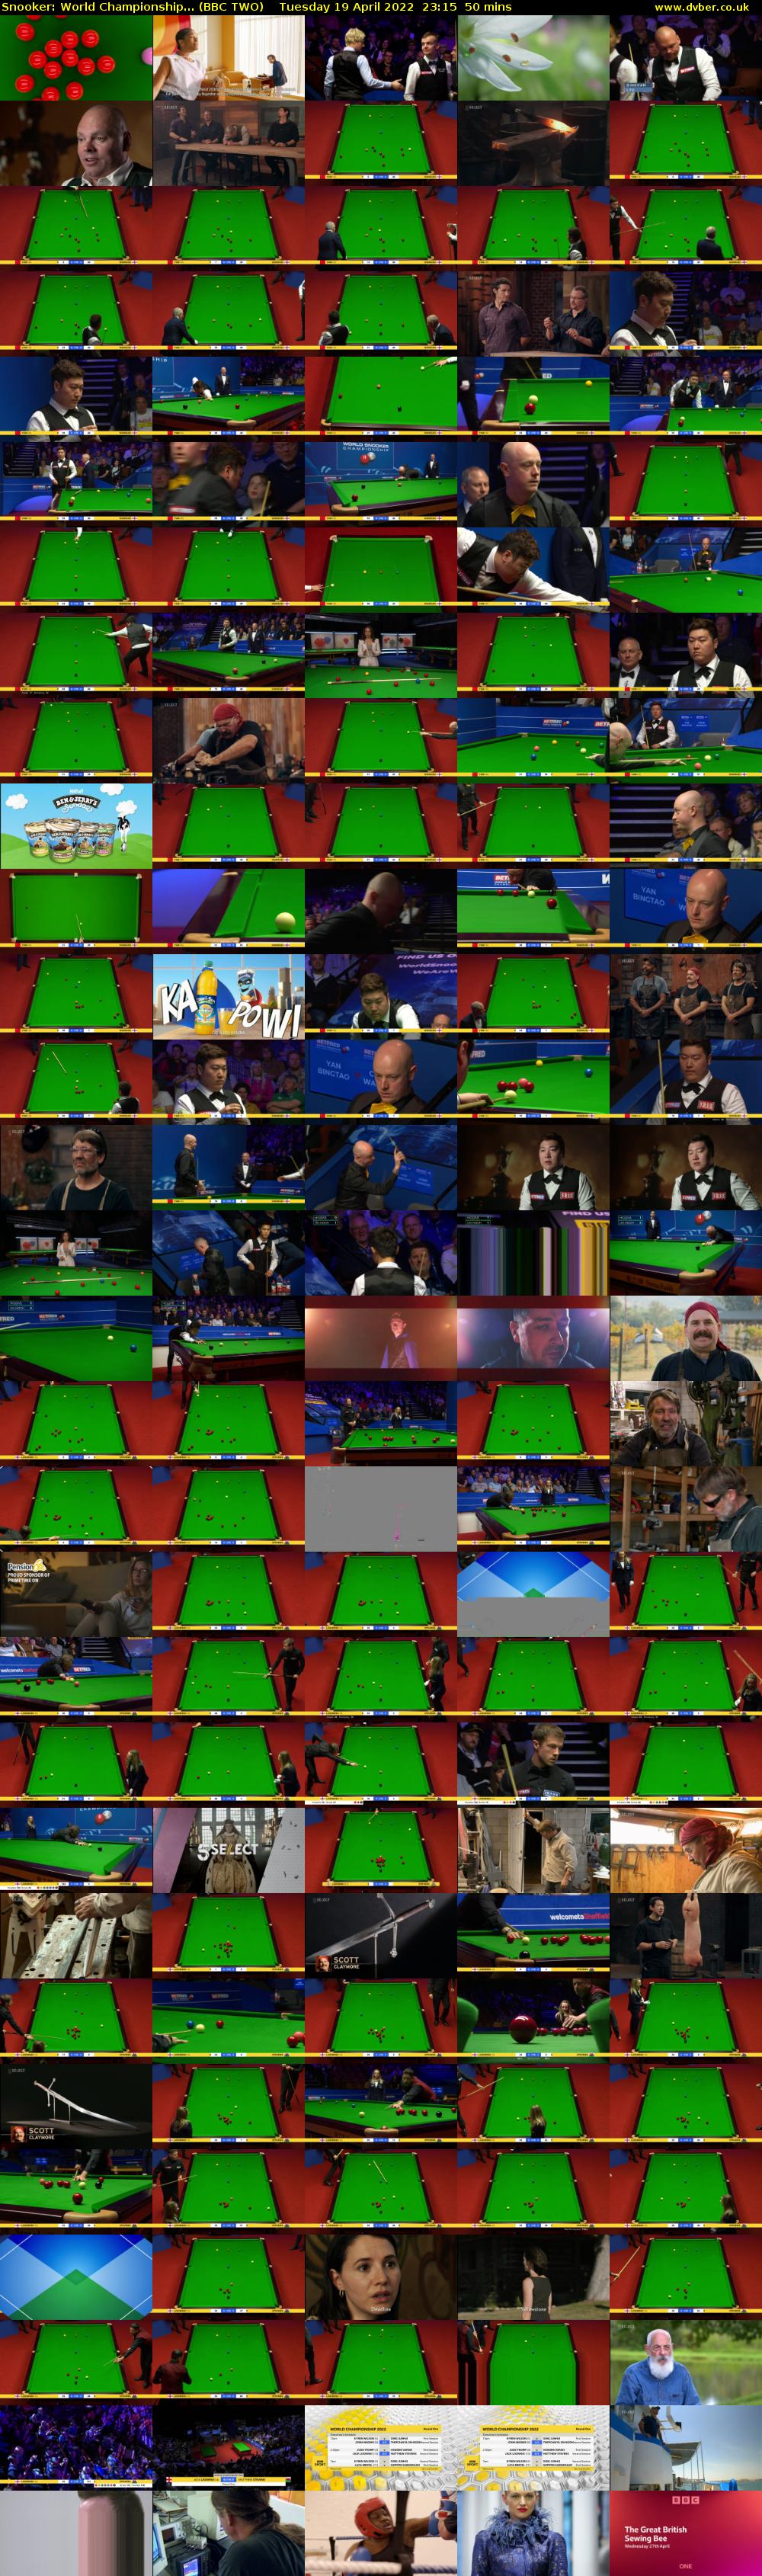 Snooker: World Championship... (BBC TWO) Tuesday 19 April 2022 23:15 - 00:05